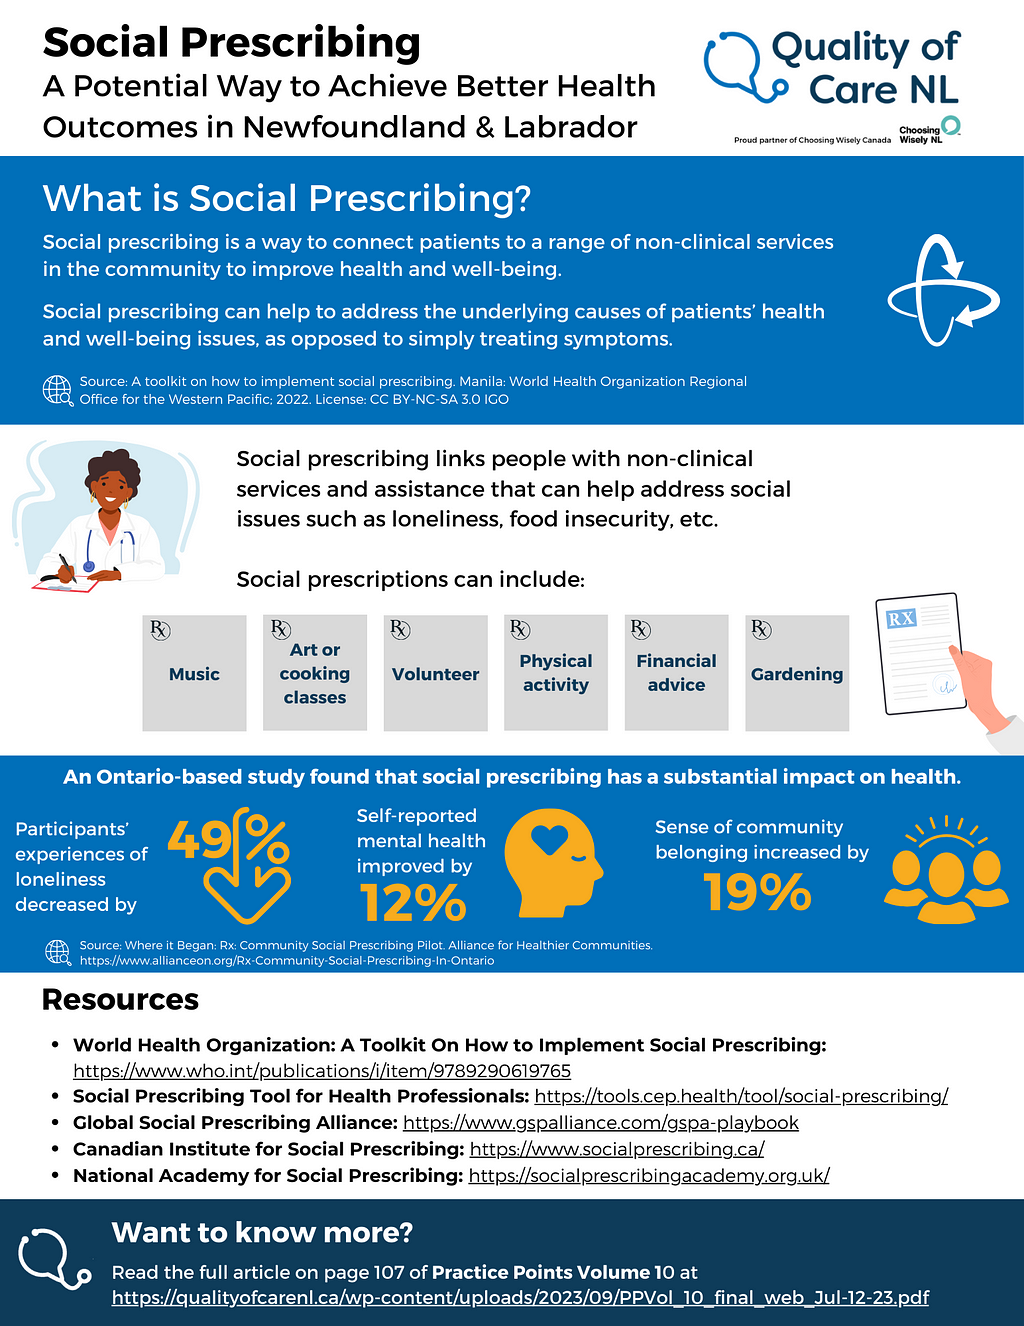 An infographic titled Social Prescribing: A potential way to achieve better health outcomes in Newfoundland & Labrador